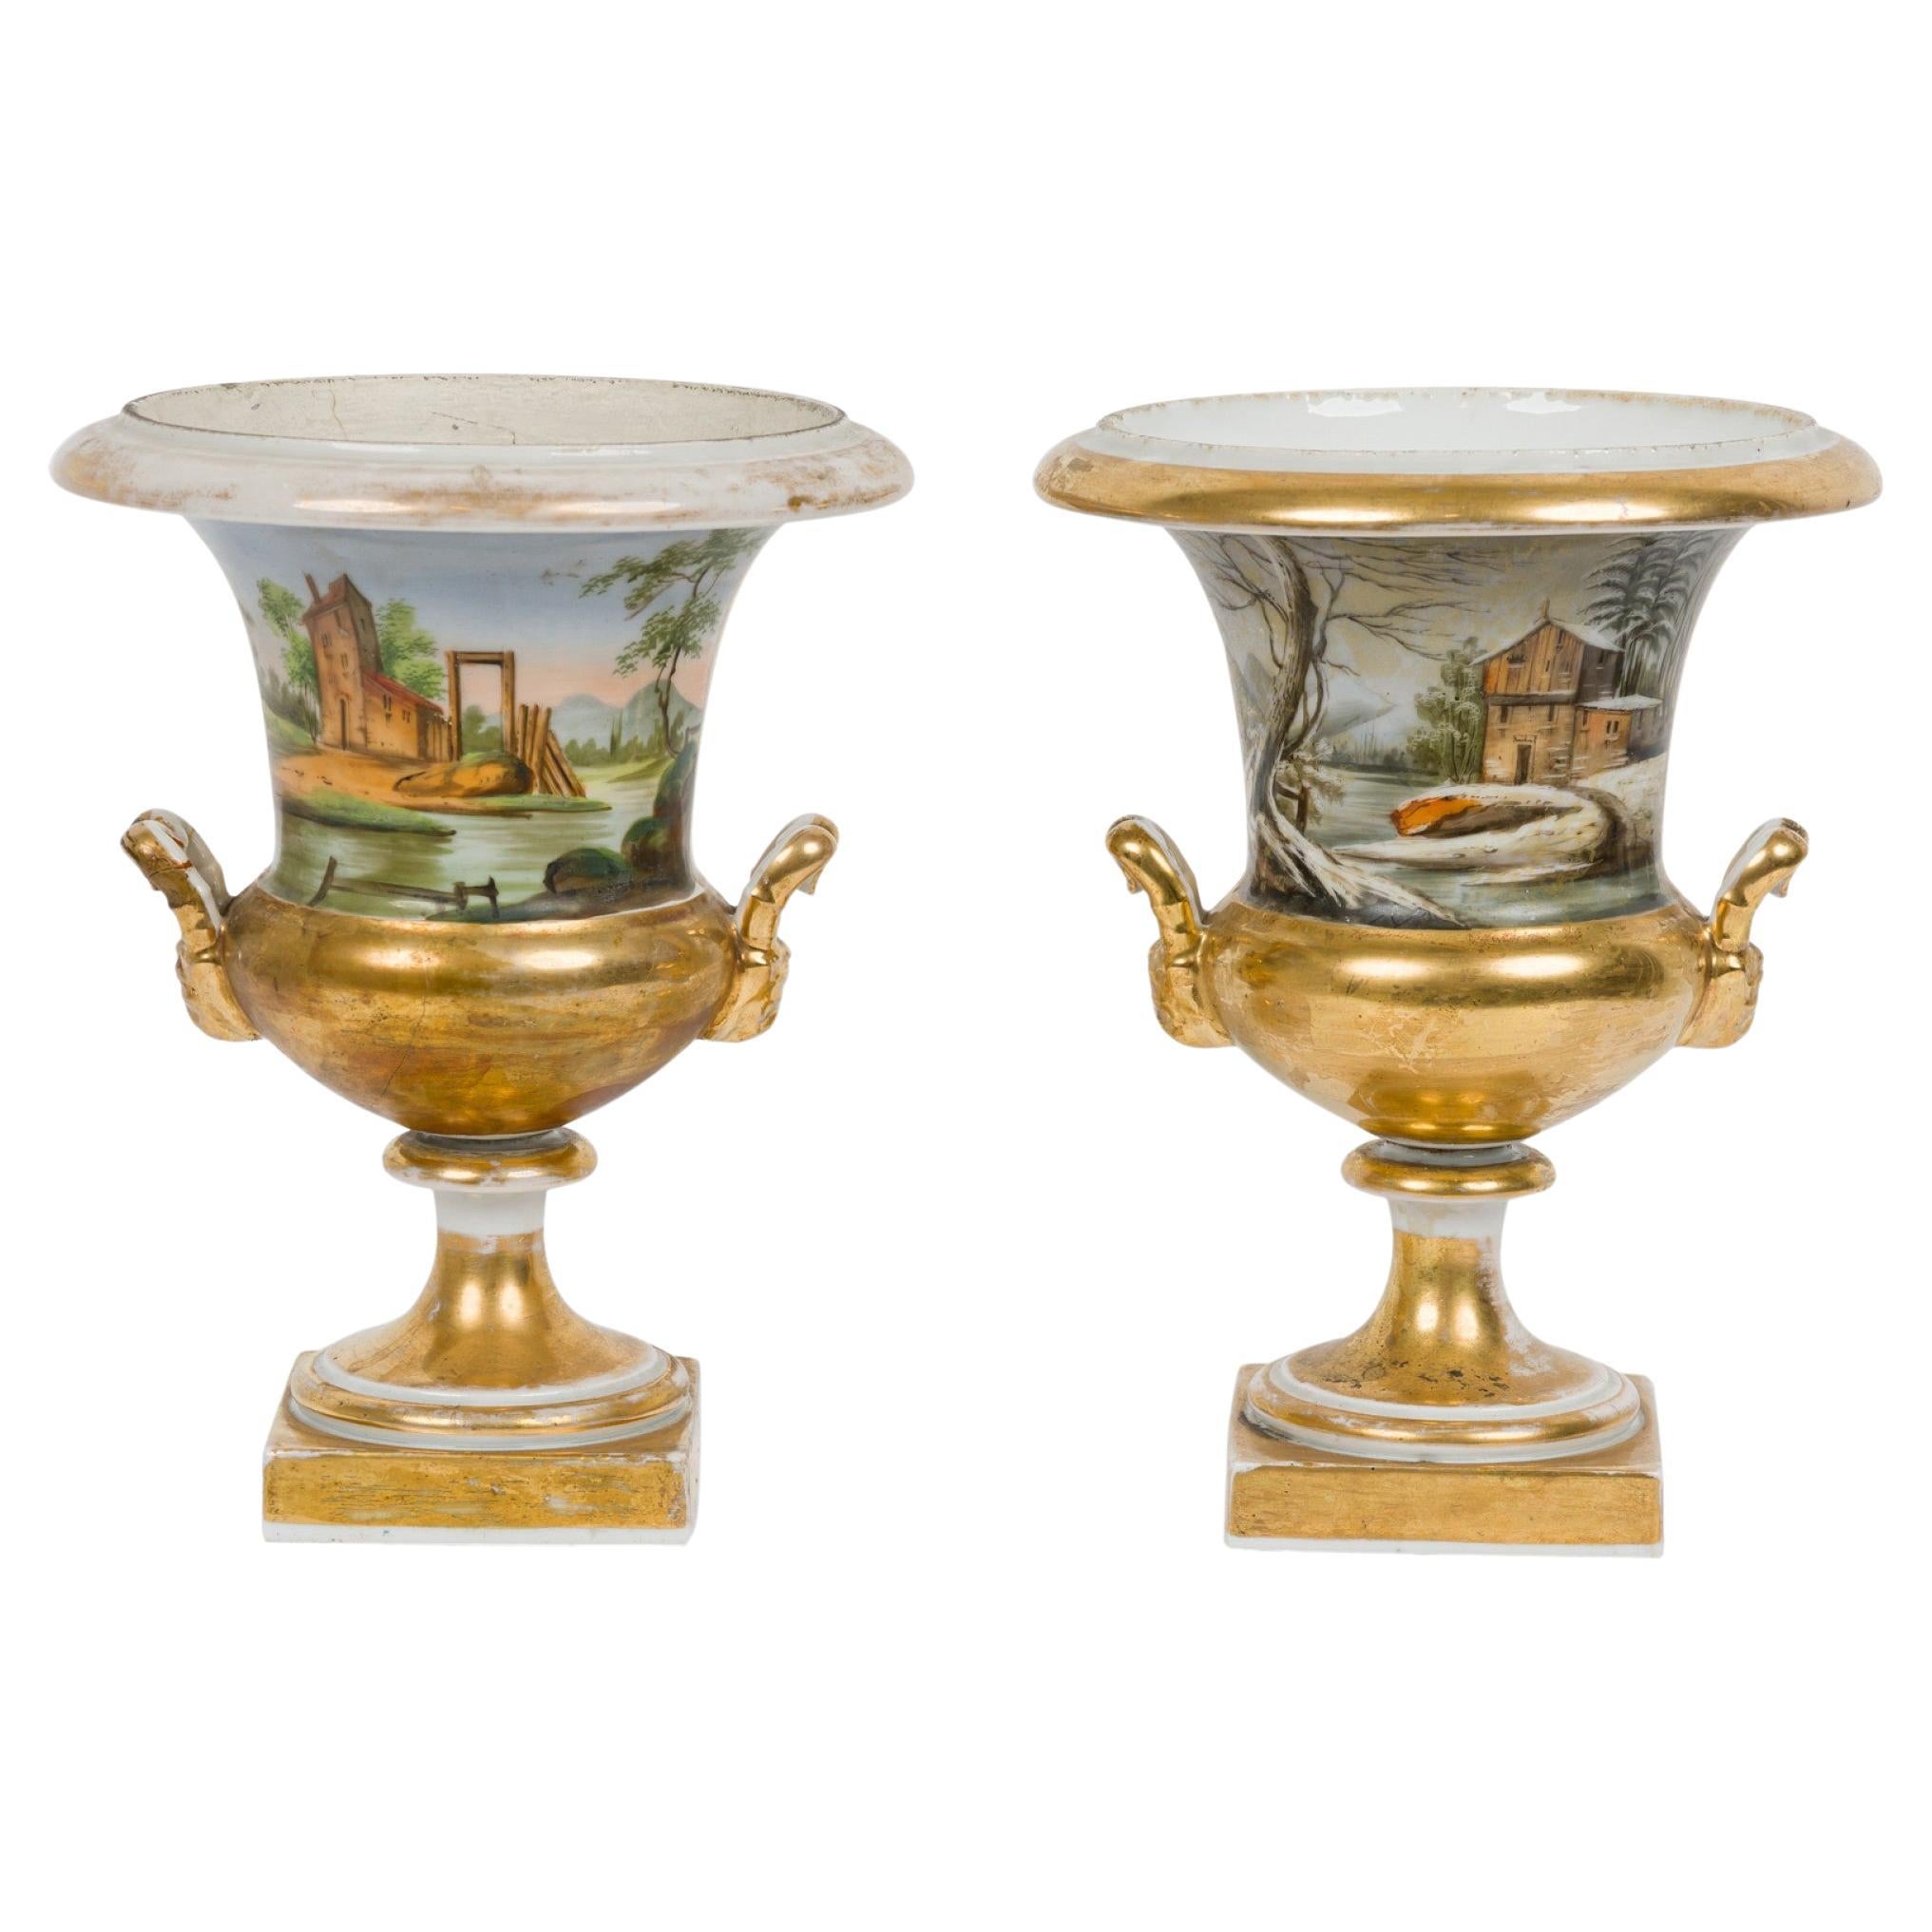 Pair of French Victorian Sevre Compagna Gilt and Painted Porcelain Urns